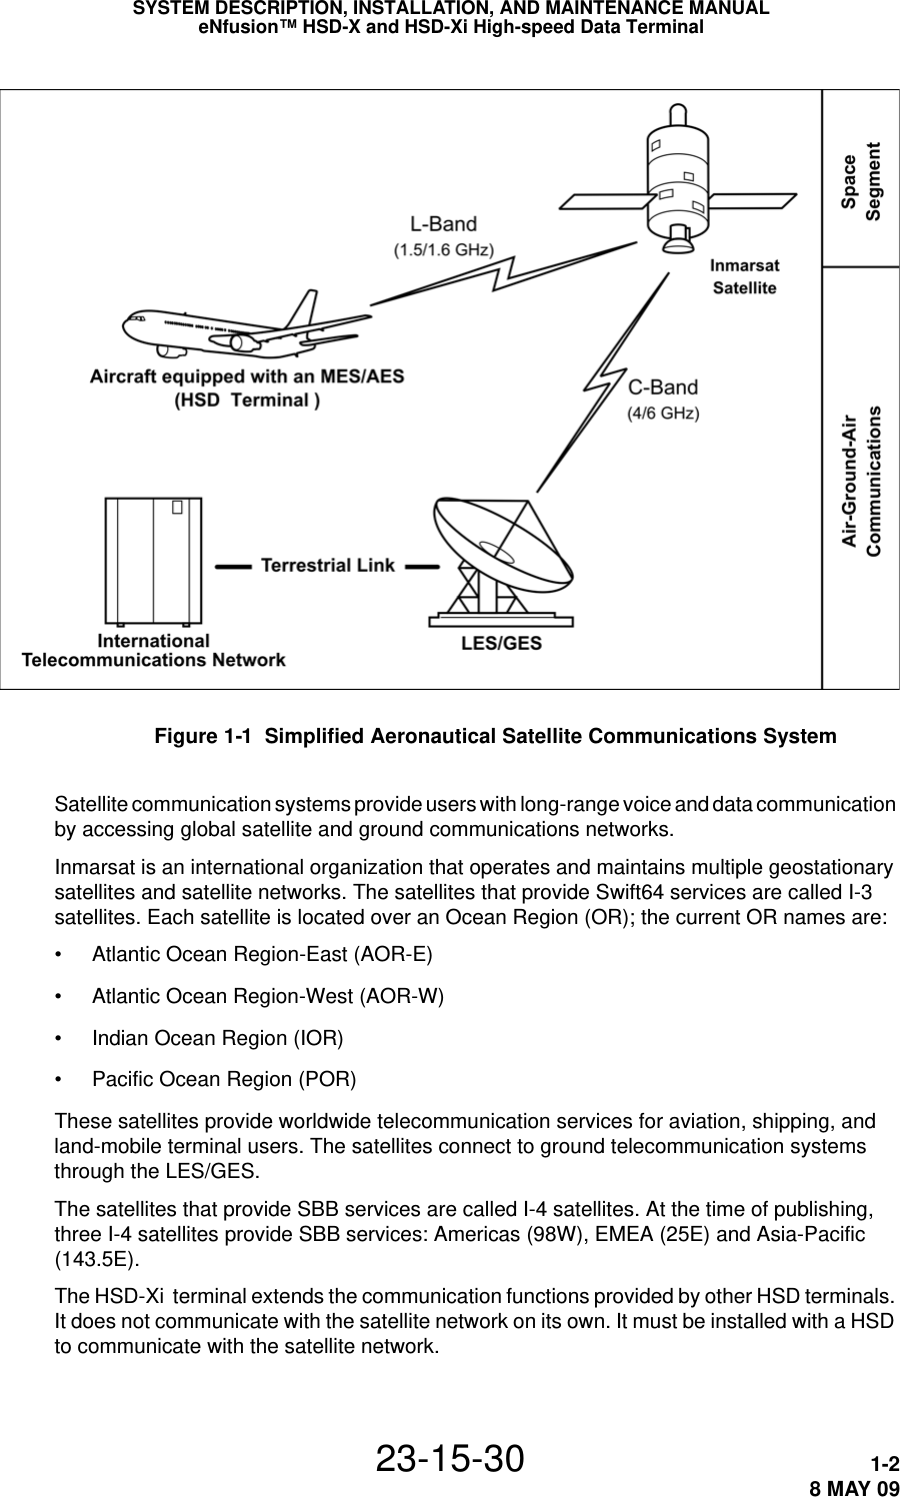 SYSTEM DESCRIPTION, INSTALLATION, AND MAINTENANCE MANUALeNfusion™ HSD-X and HSD-Xi High-speed Data Terminal23-15-30 1-28 MAY 09Figure 1-1  Simplified Aeronautical Satellite Communications SystemSatellite communication systems provide users with long-range voice and data communication by accessing global satellite and ground communications networks.Inmarsat is an international organization that operates and maintains multiple geostationary satellites and satellite networks. The satellites that provide Swift64 services are called I-3 satellites. Each satellite is located over an Ocean Region (OR); the current OR names are:• Atlantic Ocean Region-East (AOR-E)• Atlantic Ocean Region-West (AOR-W)• Indian Ocean Region (IOR)• Pacific Ocean Region (POR)These satellites provide worldwide telecommunication services for aviation, shipping, and land-mobile terminal users. The satellites connect to ground telecommunication systems through the LES/GES.The satellites that provide SBB services are called I-4 satellites. At the time of publishing, three I-4 satellites provide SBB services: Americas (98W), EMEA (25E) and Asia-Pacific (143.5E). The HSD-Xi  terminal extends the communication functions provided by other HSD terminals. It does not communicate with the satellite network on its own. It must be installed with a HSD to communicate with the satellite network.